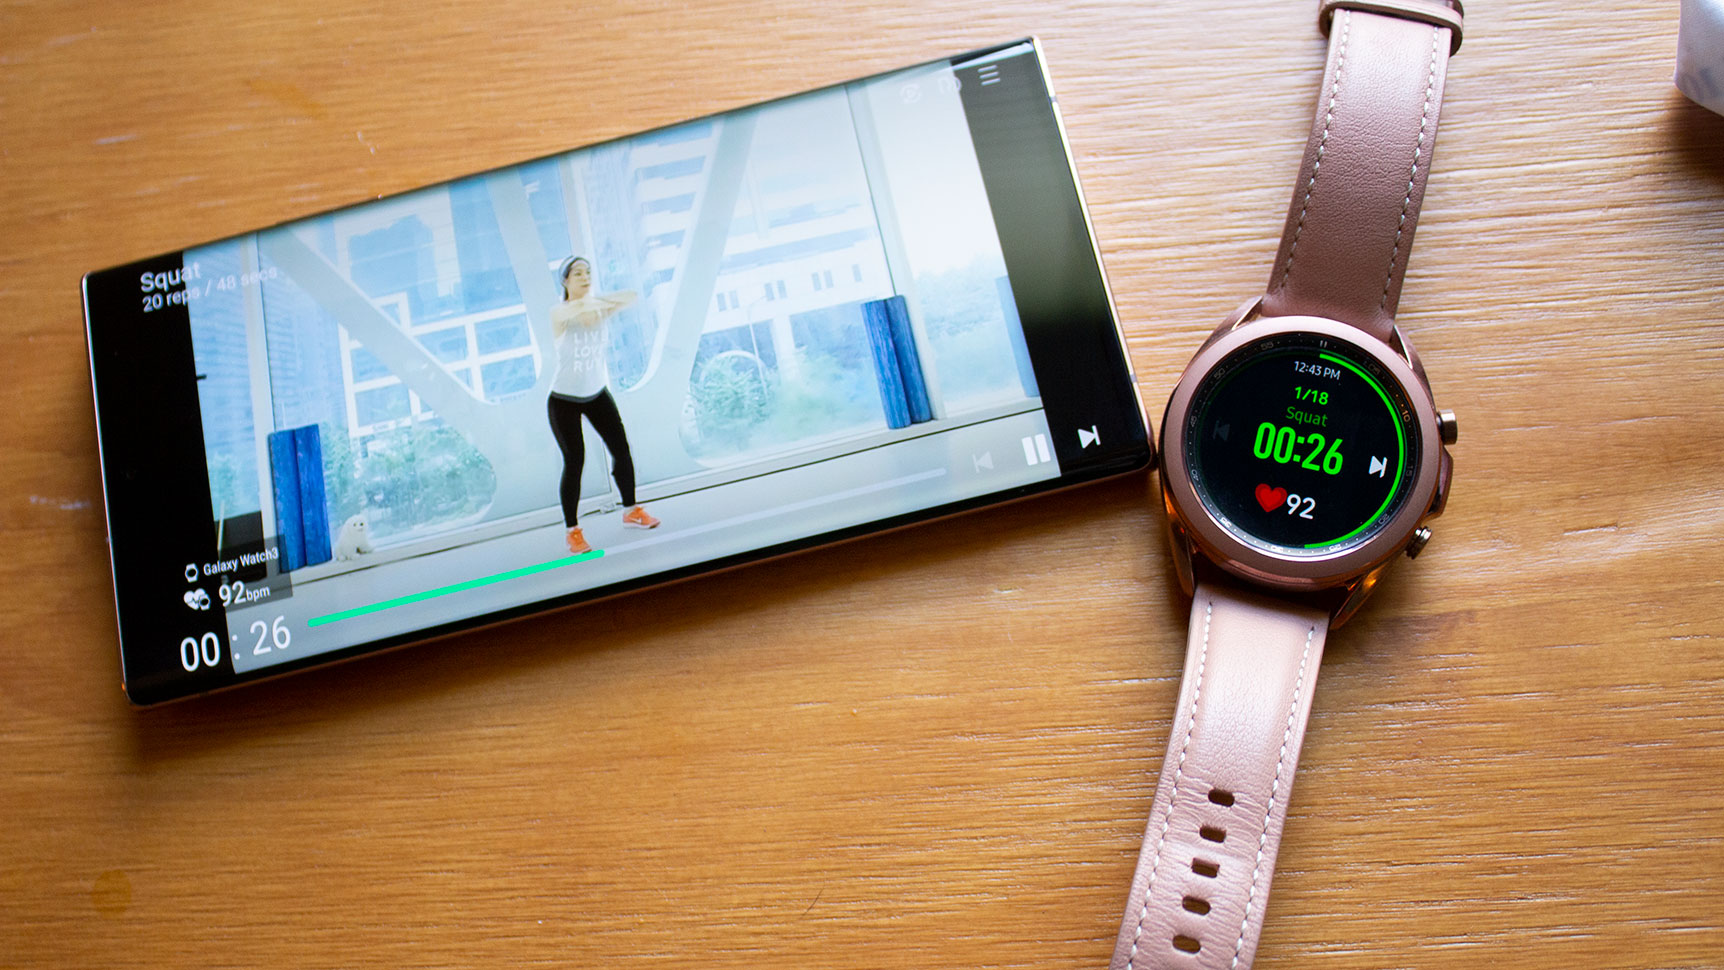 You can stream workout videos via the Samsung Health app. I did so many squats. You can also see my heart rate info displayed in the workout video itself. (Photo: Victoria Song/Gizmodo)